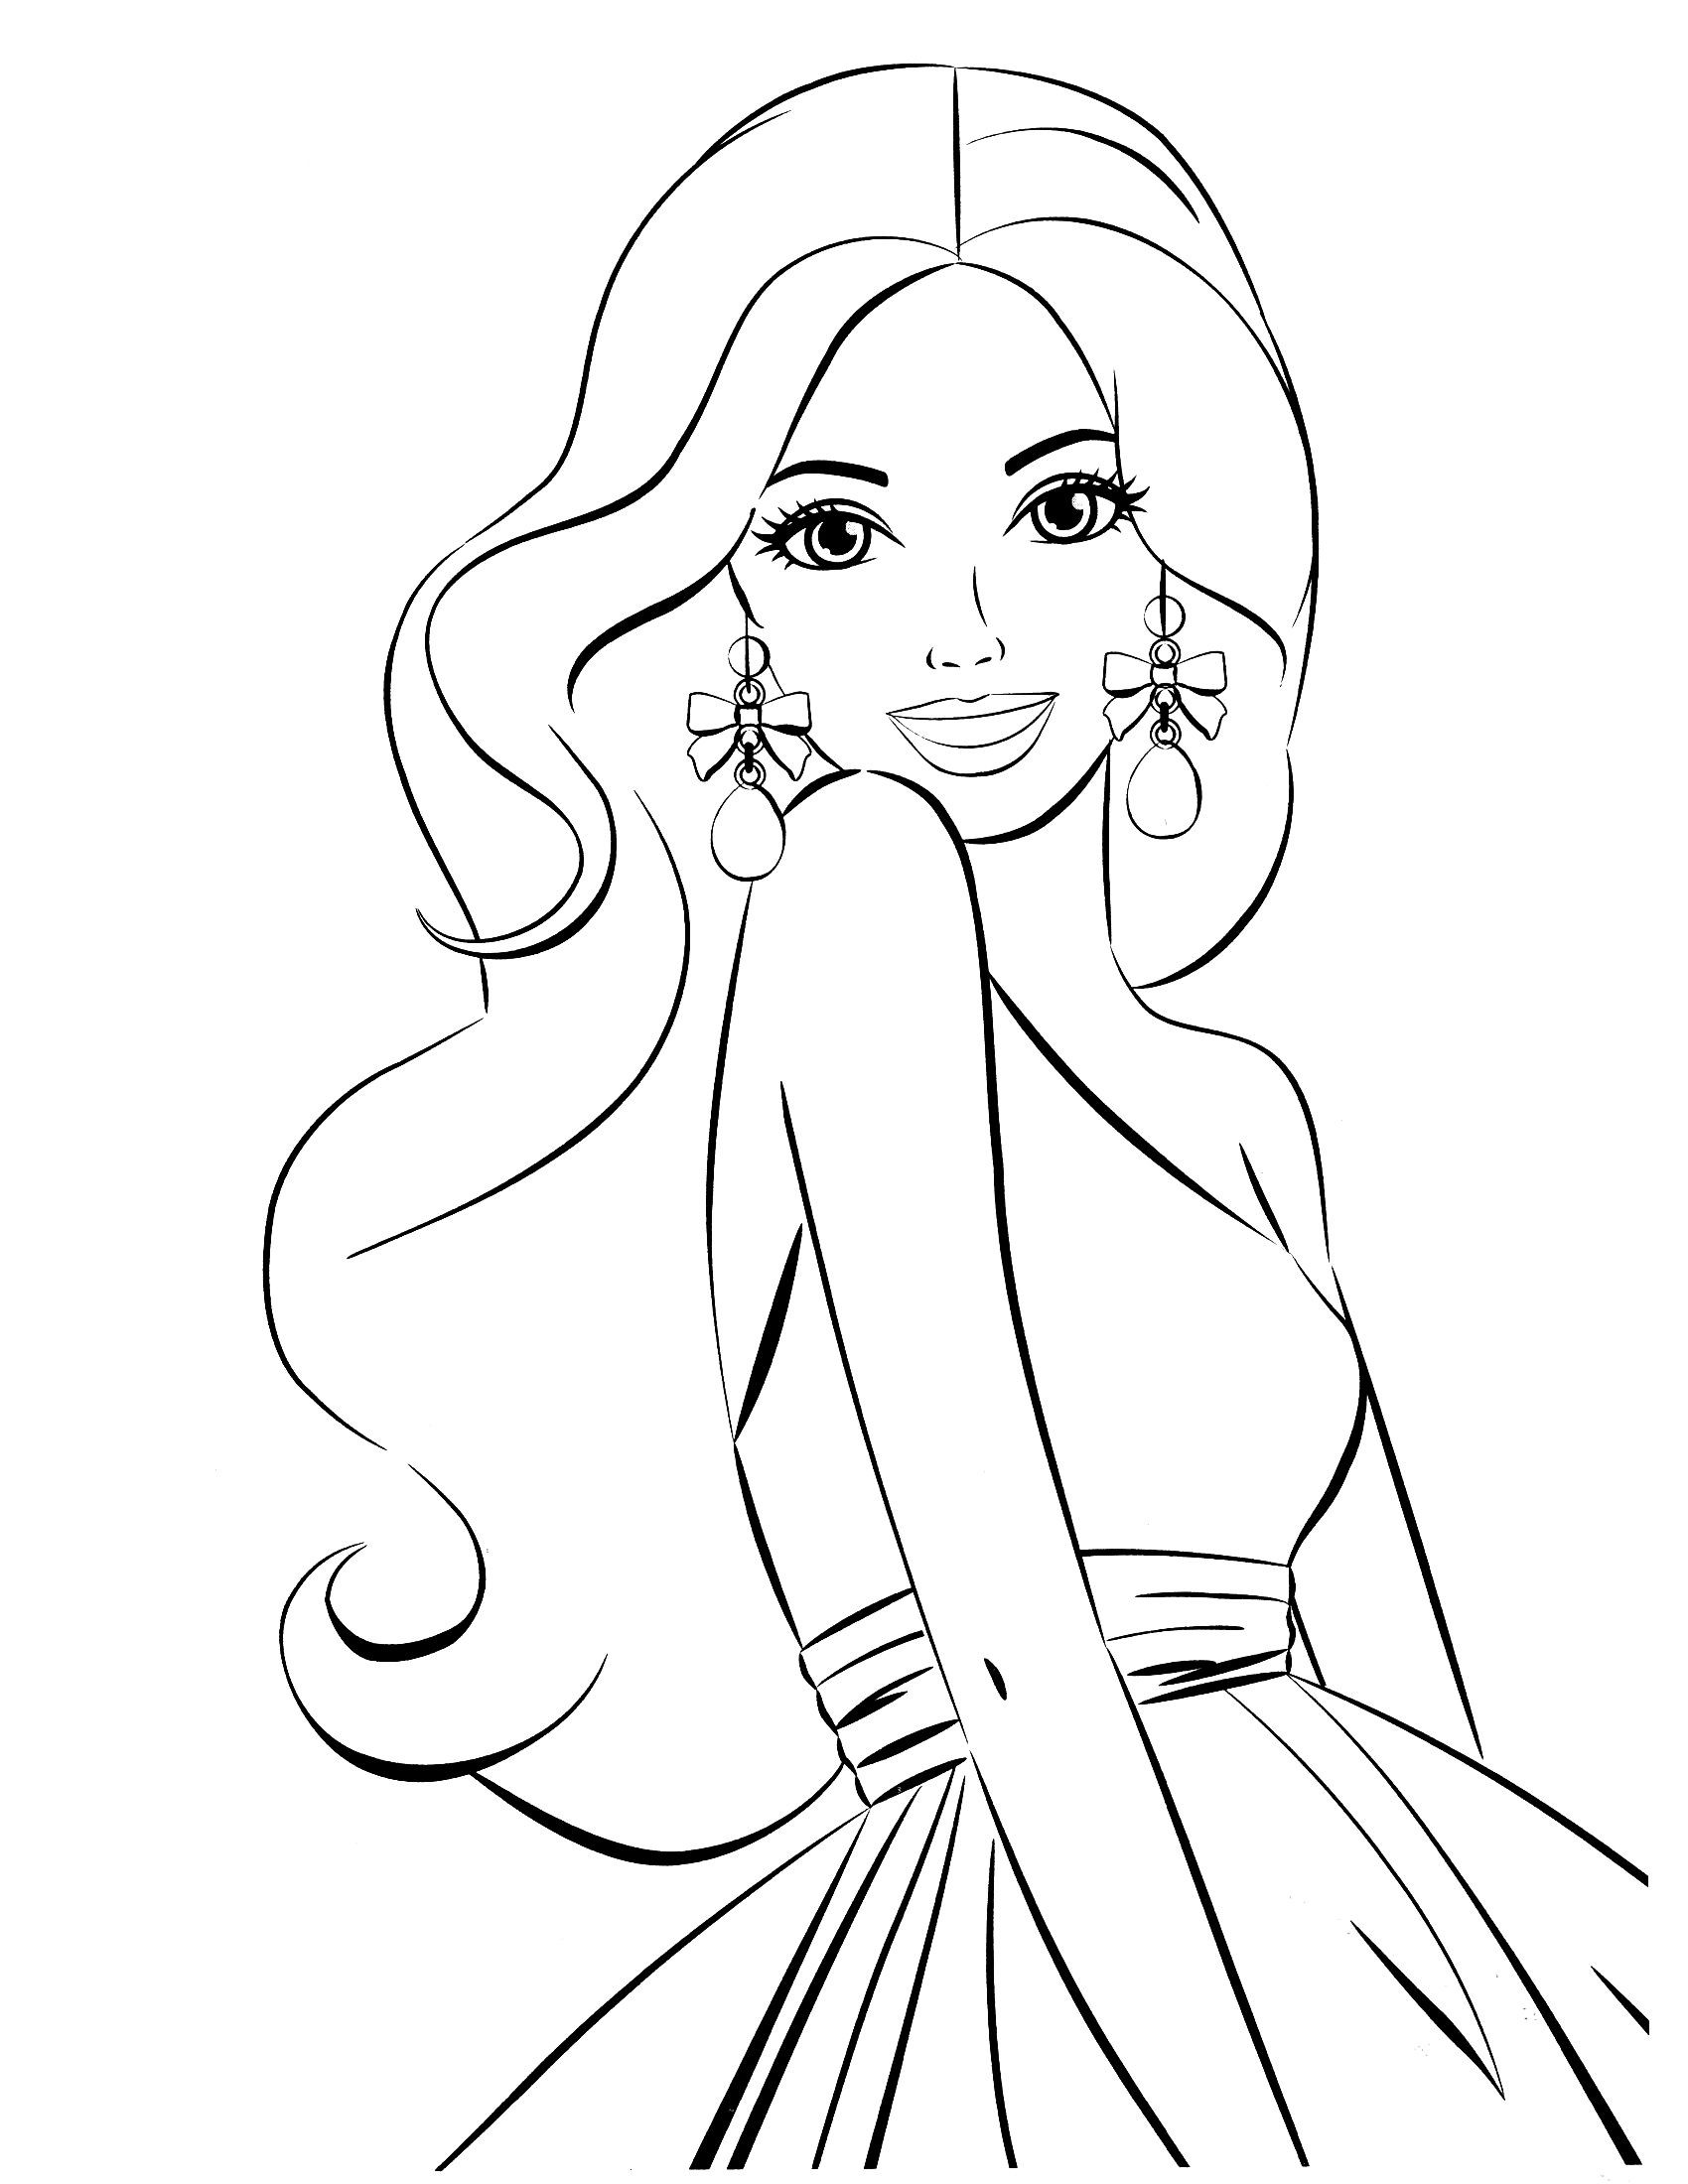 Barbie Coloring Pages For Girls
 Barbie Coloring Pages Page 1